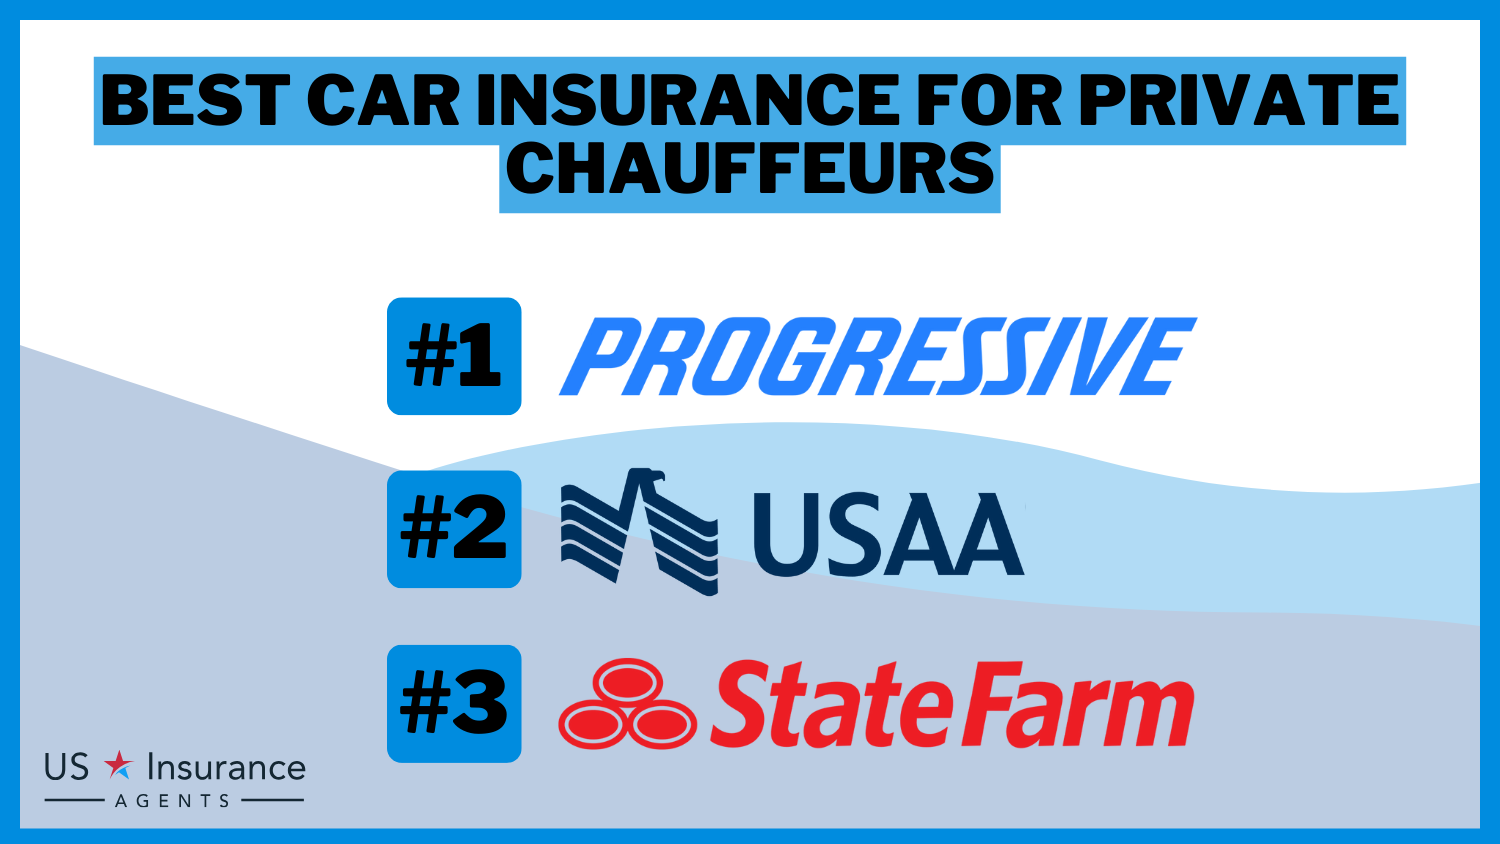 Best Car Insurance for Private Chauffeurs: Progressive, USAA and State Farm.